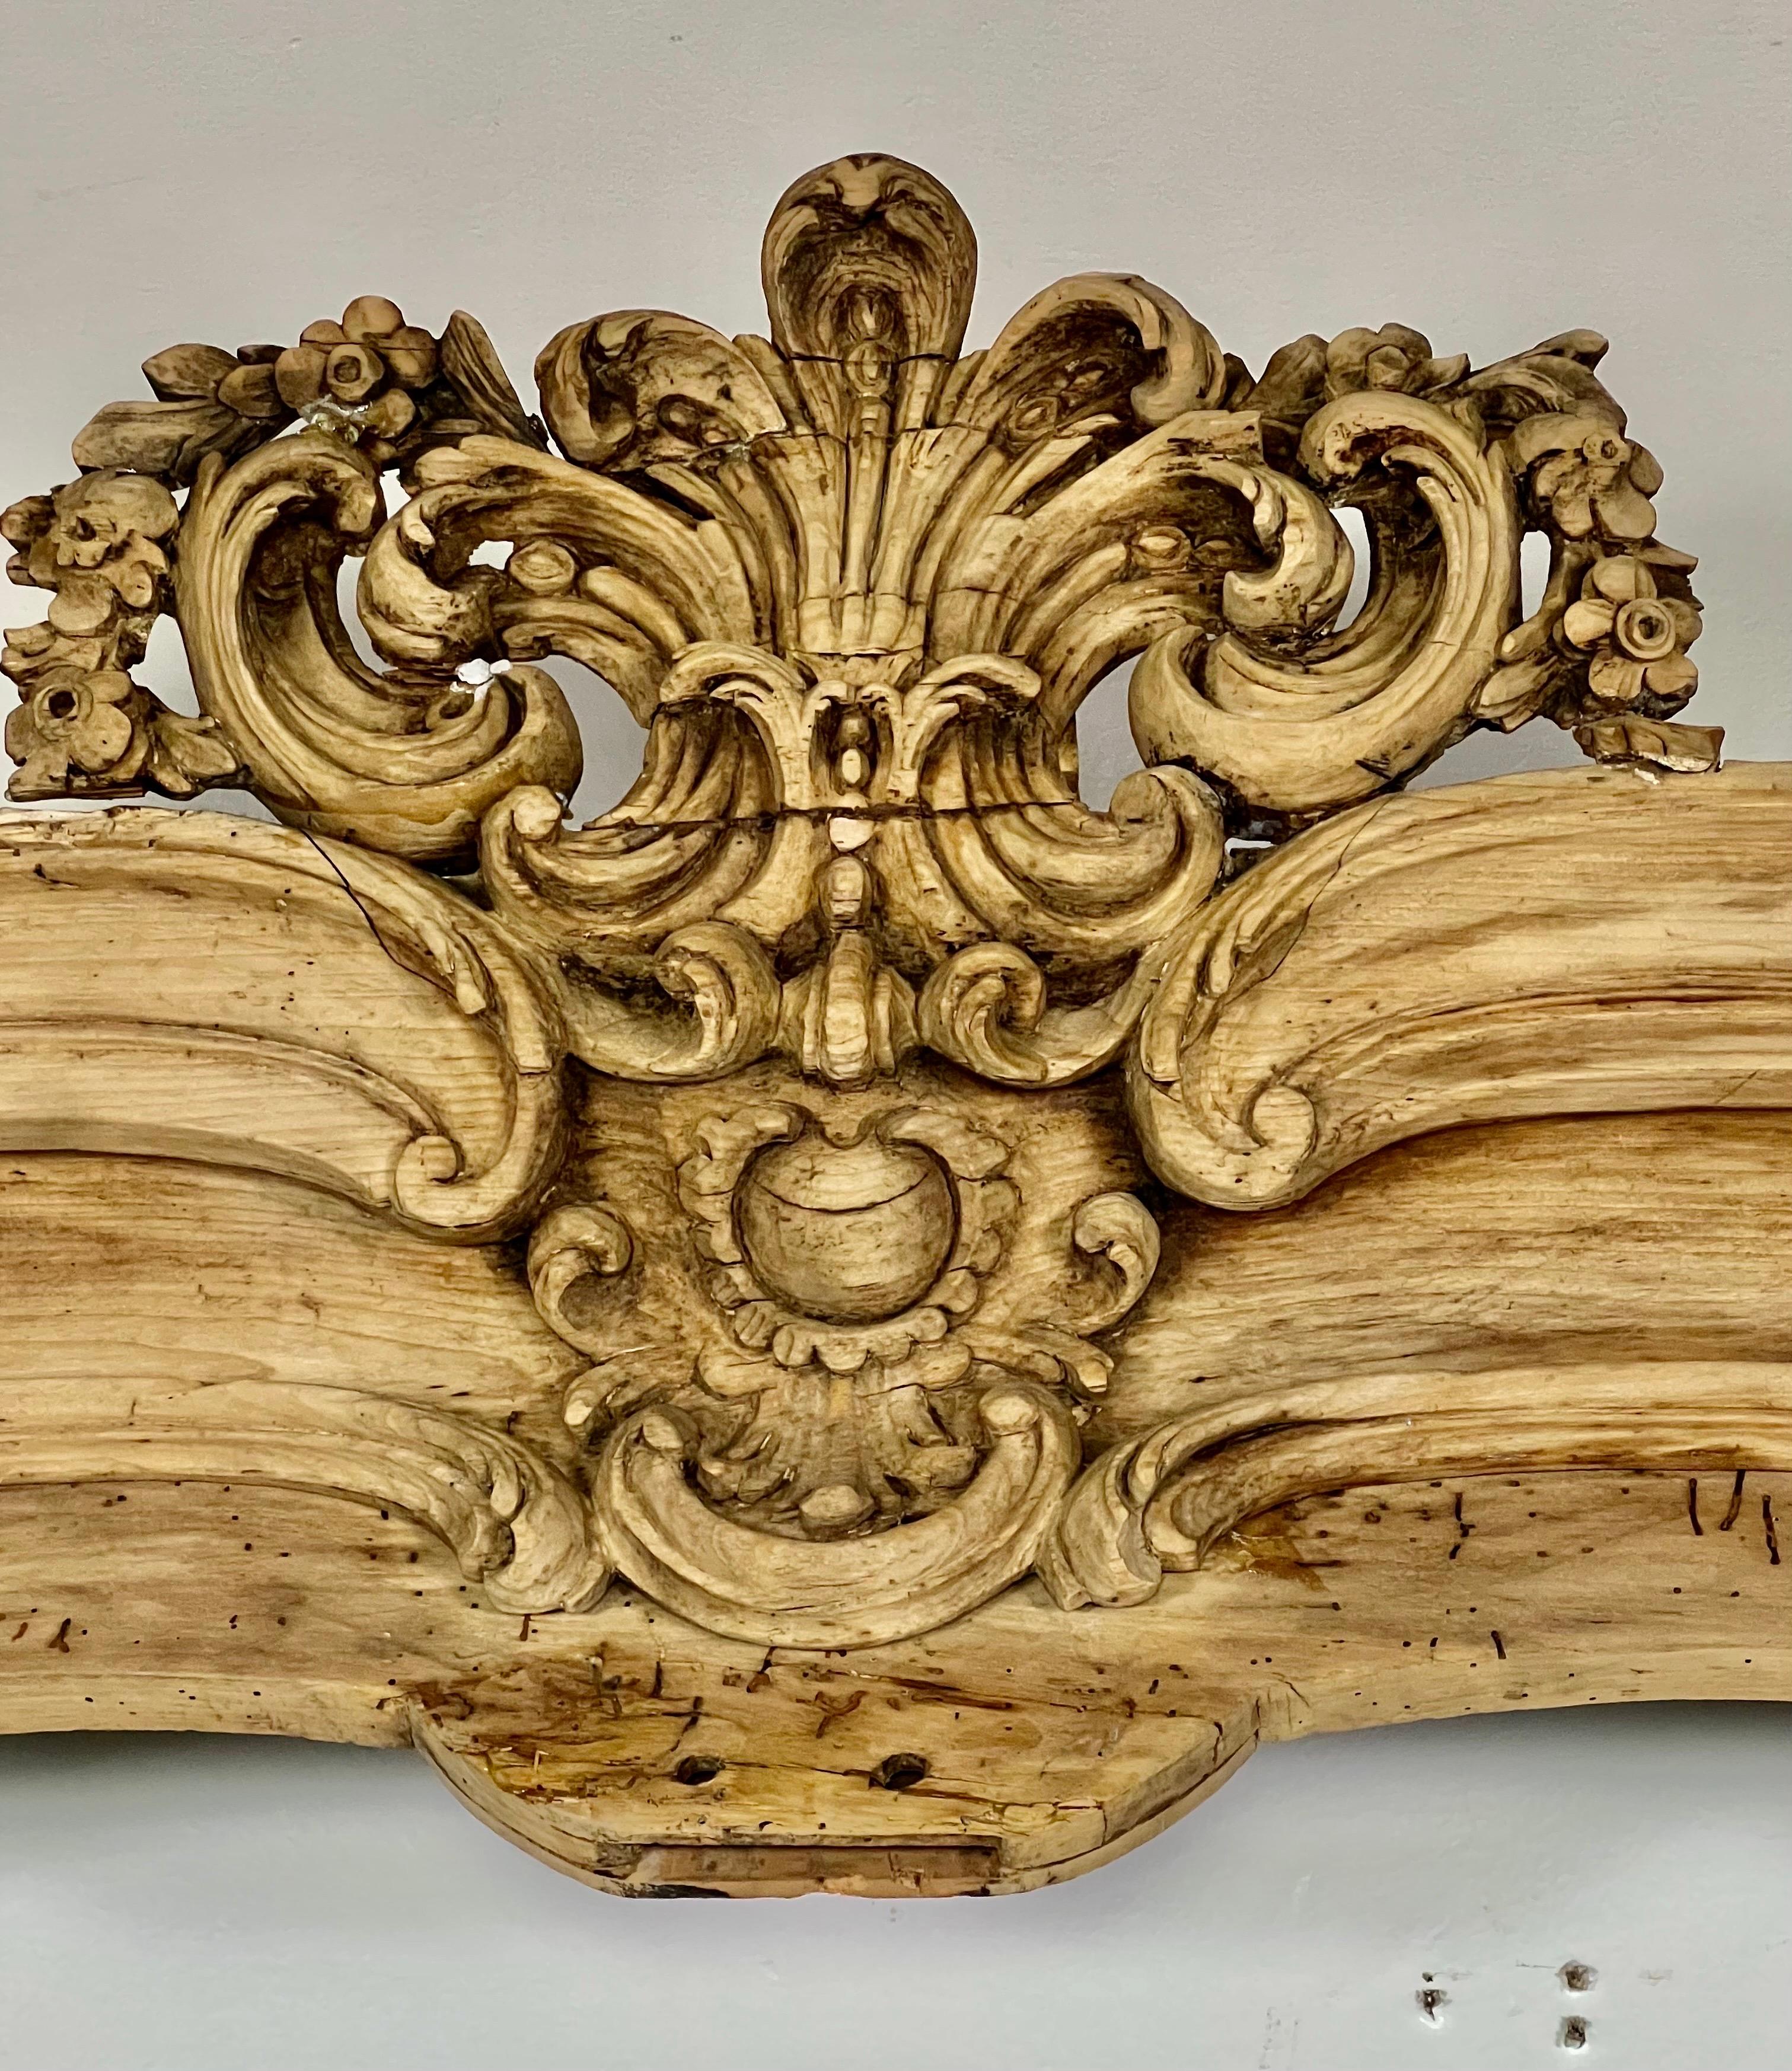 French Provincial 19th C. French Bleached Walnut Door Surround